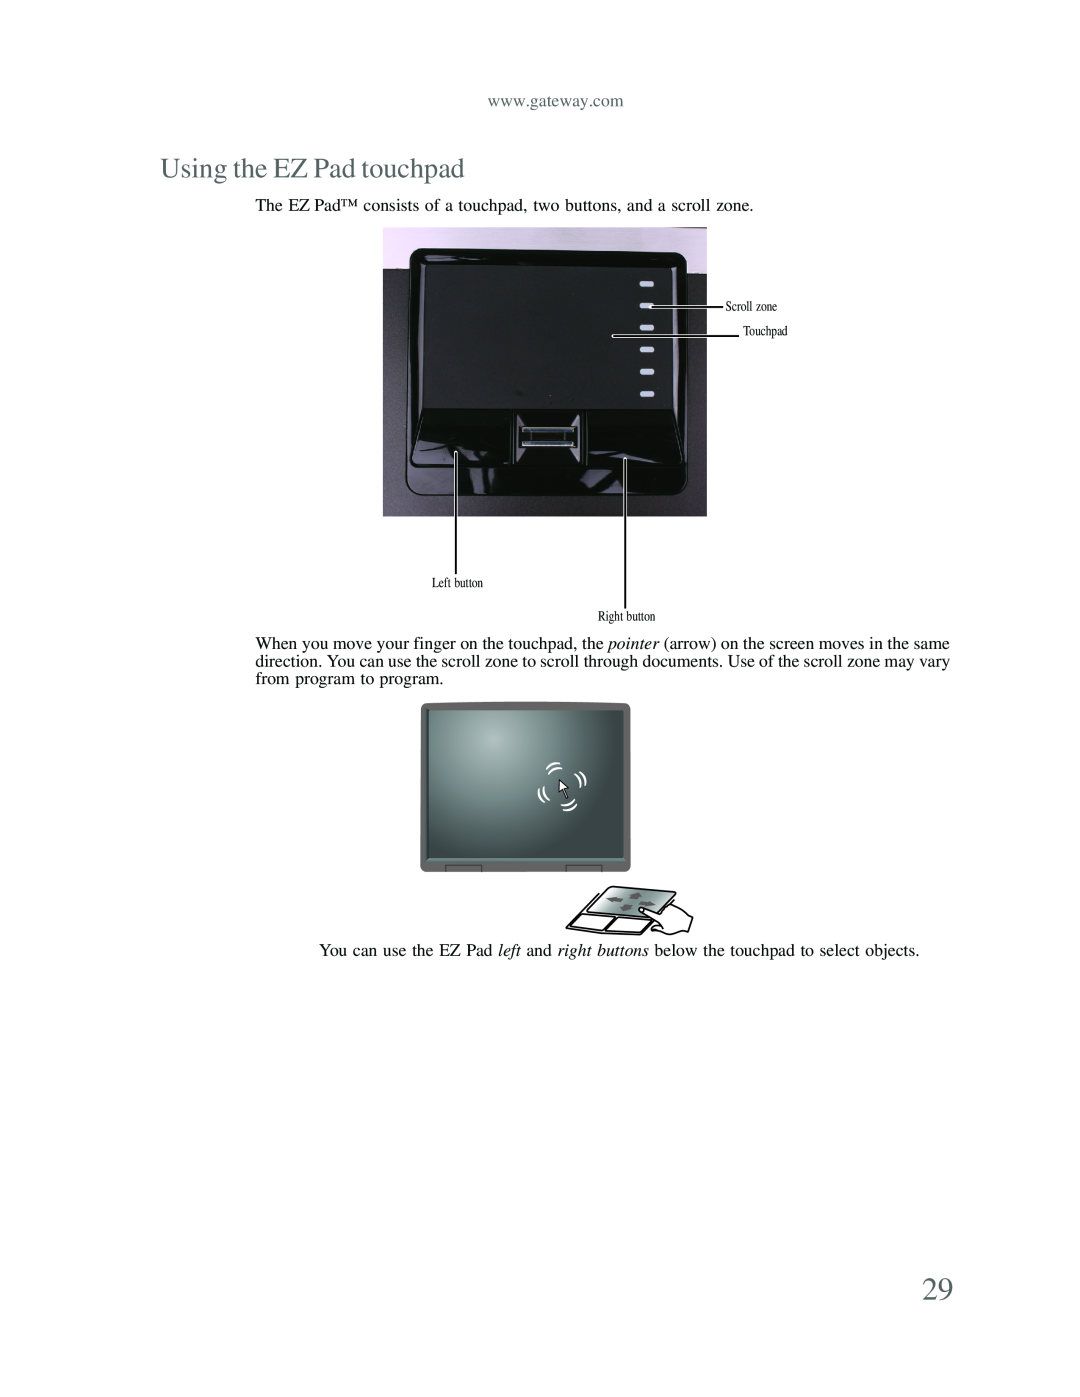 Gateway p-79 manual Using the EZ Pad touchpad 